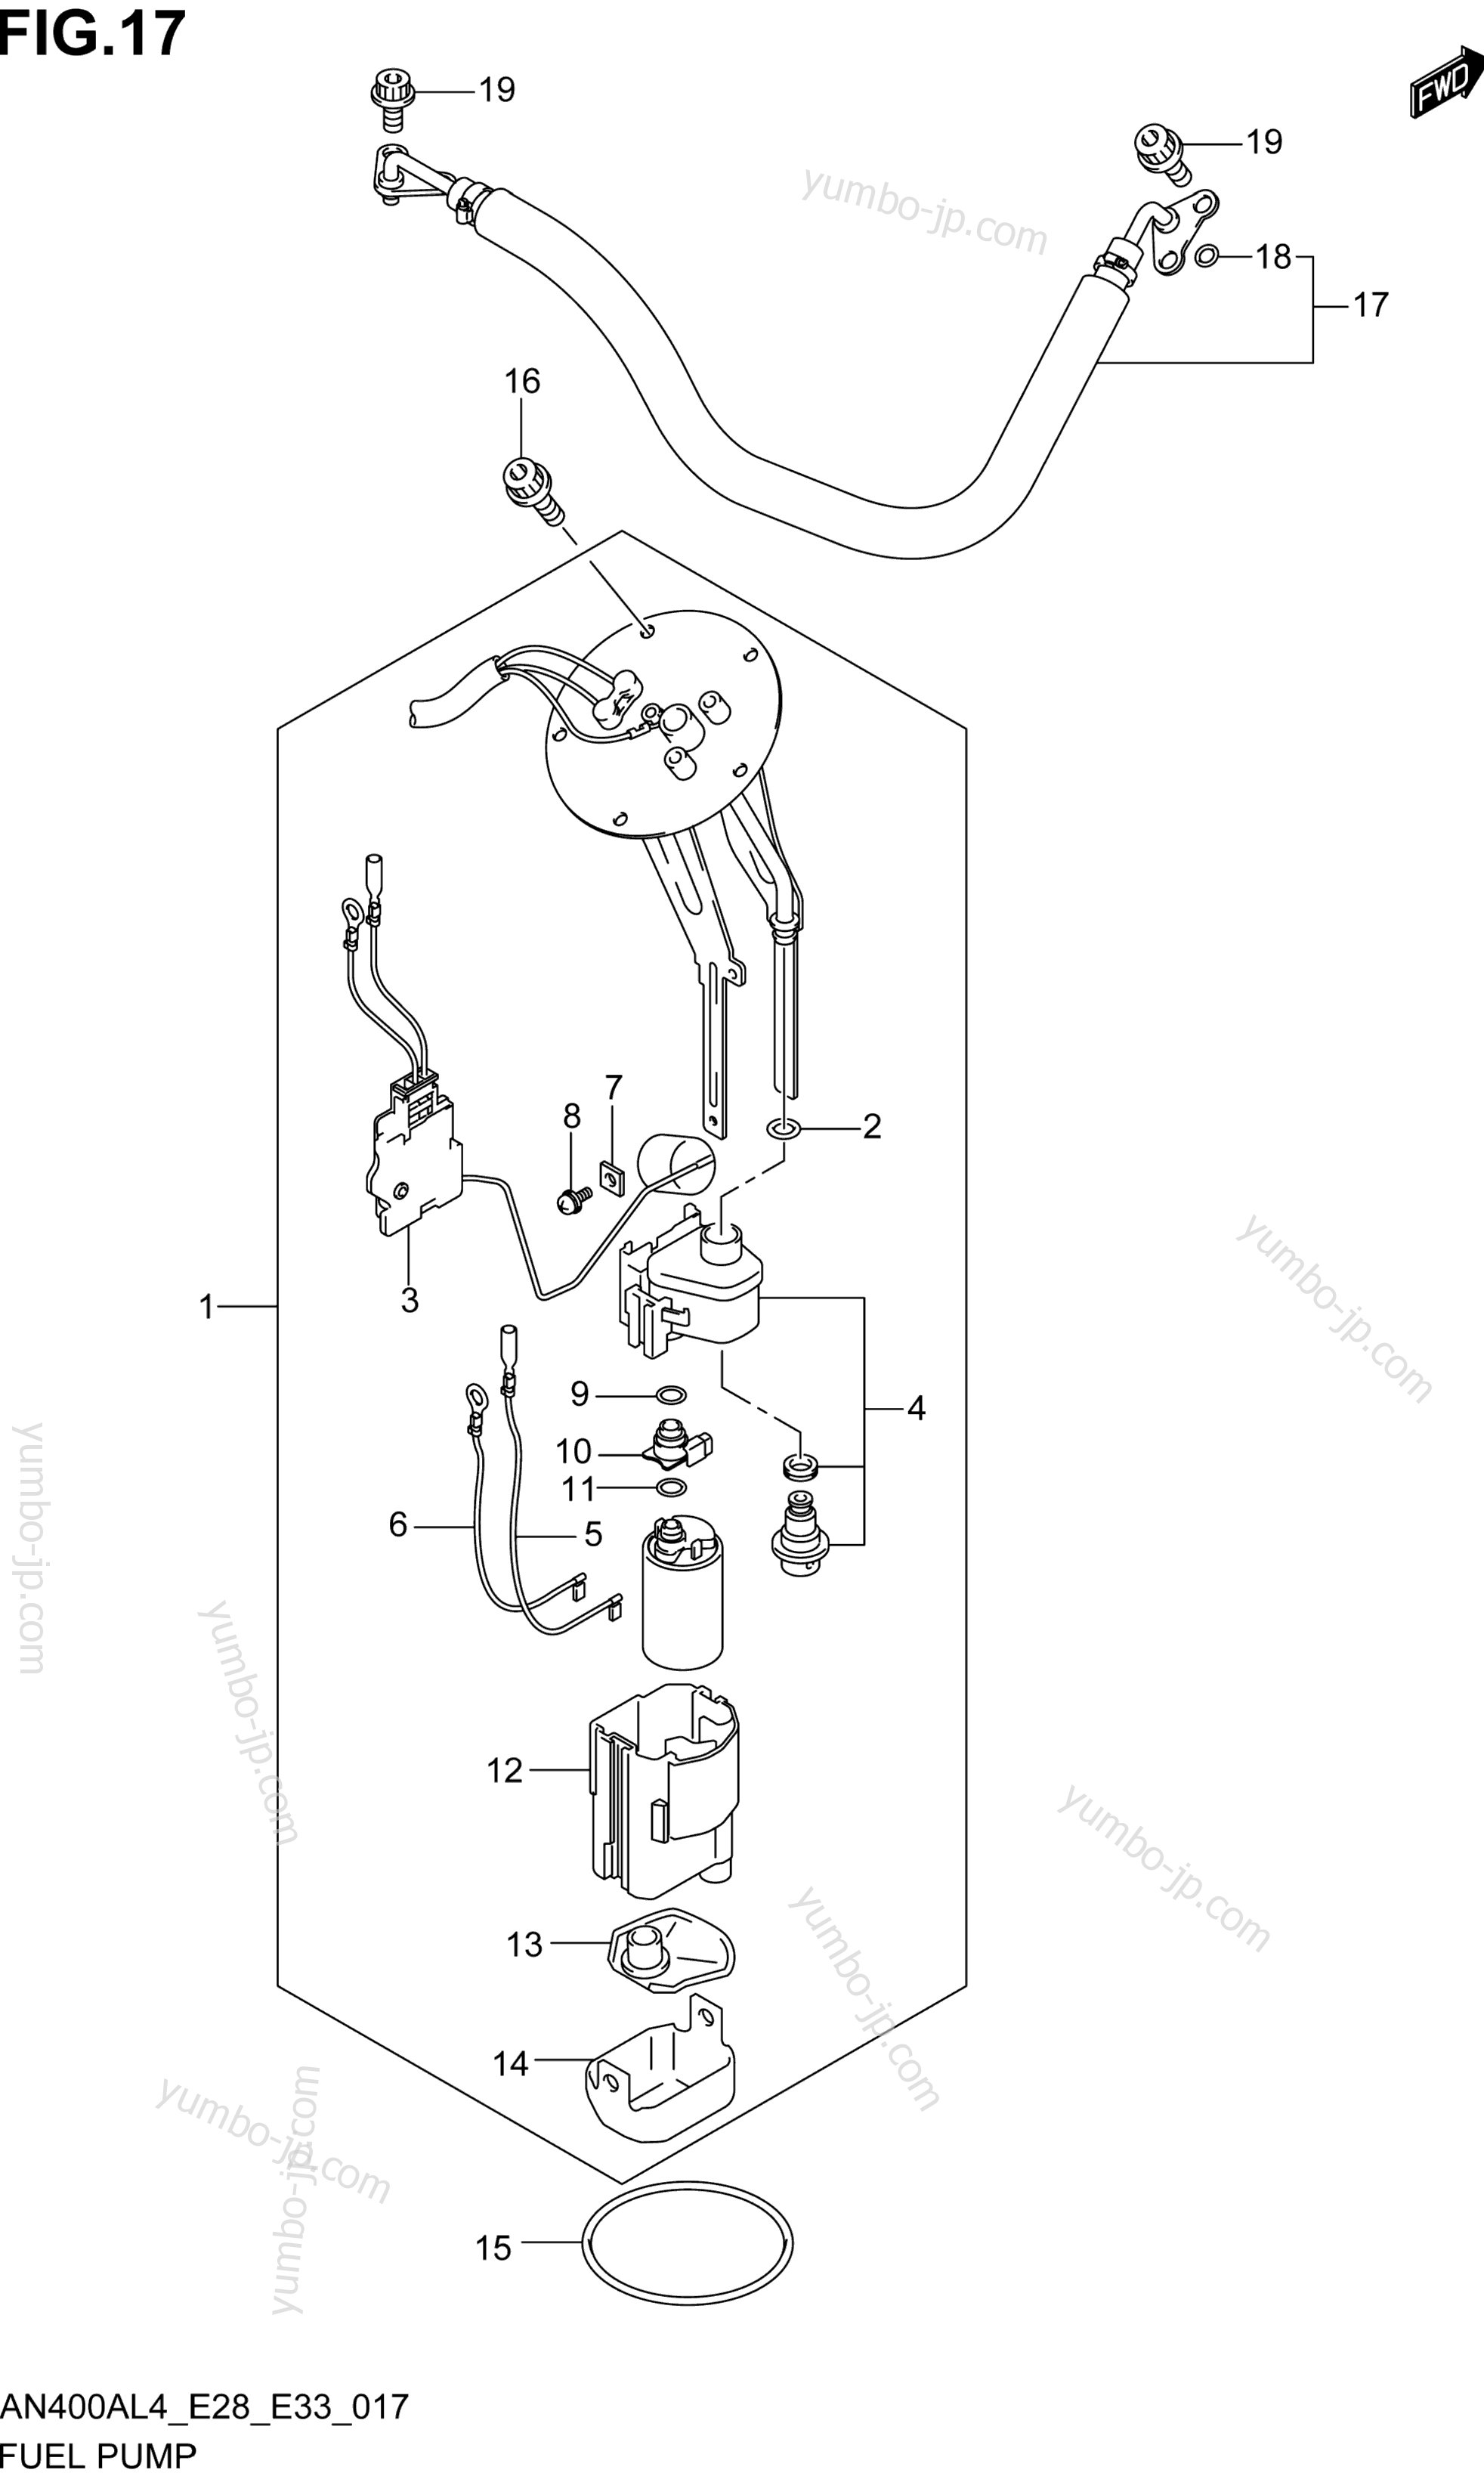 FUEL PUMP for scooters SUZUKI AN400ZA 2014 year